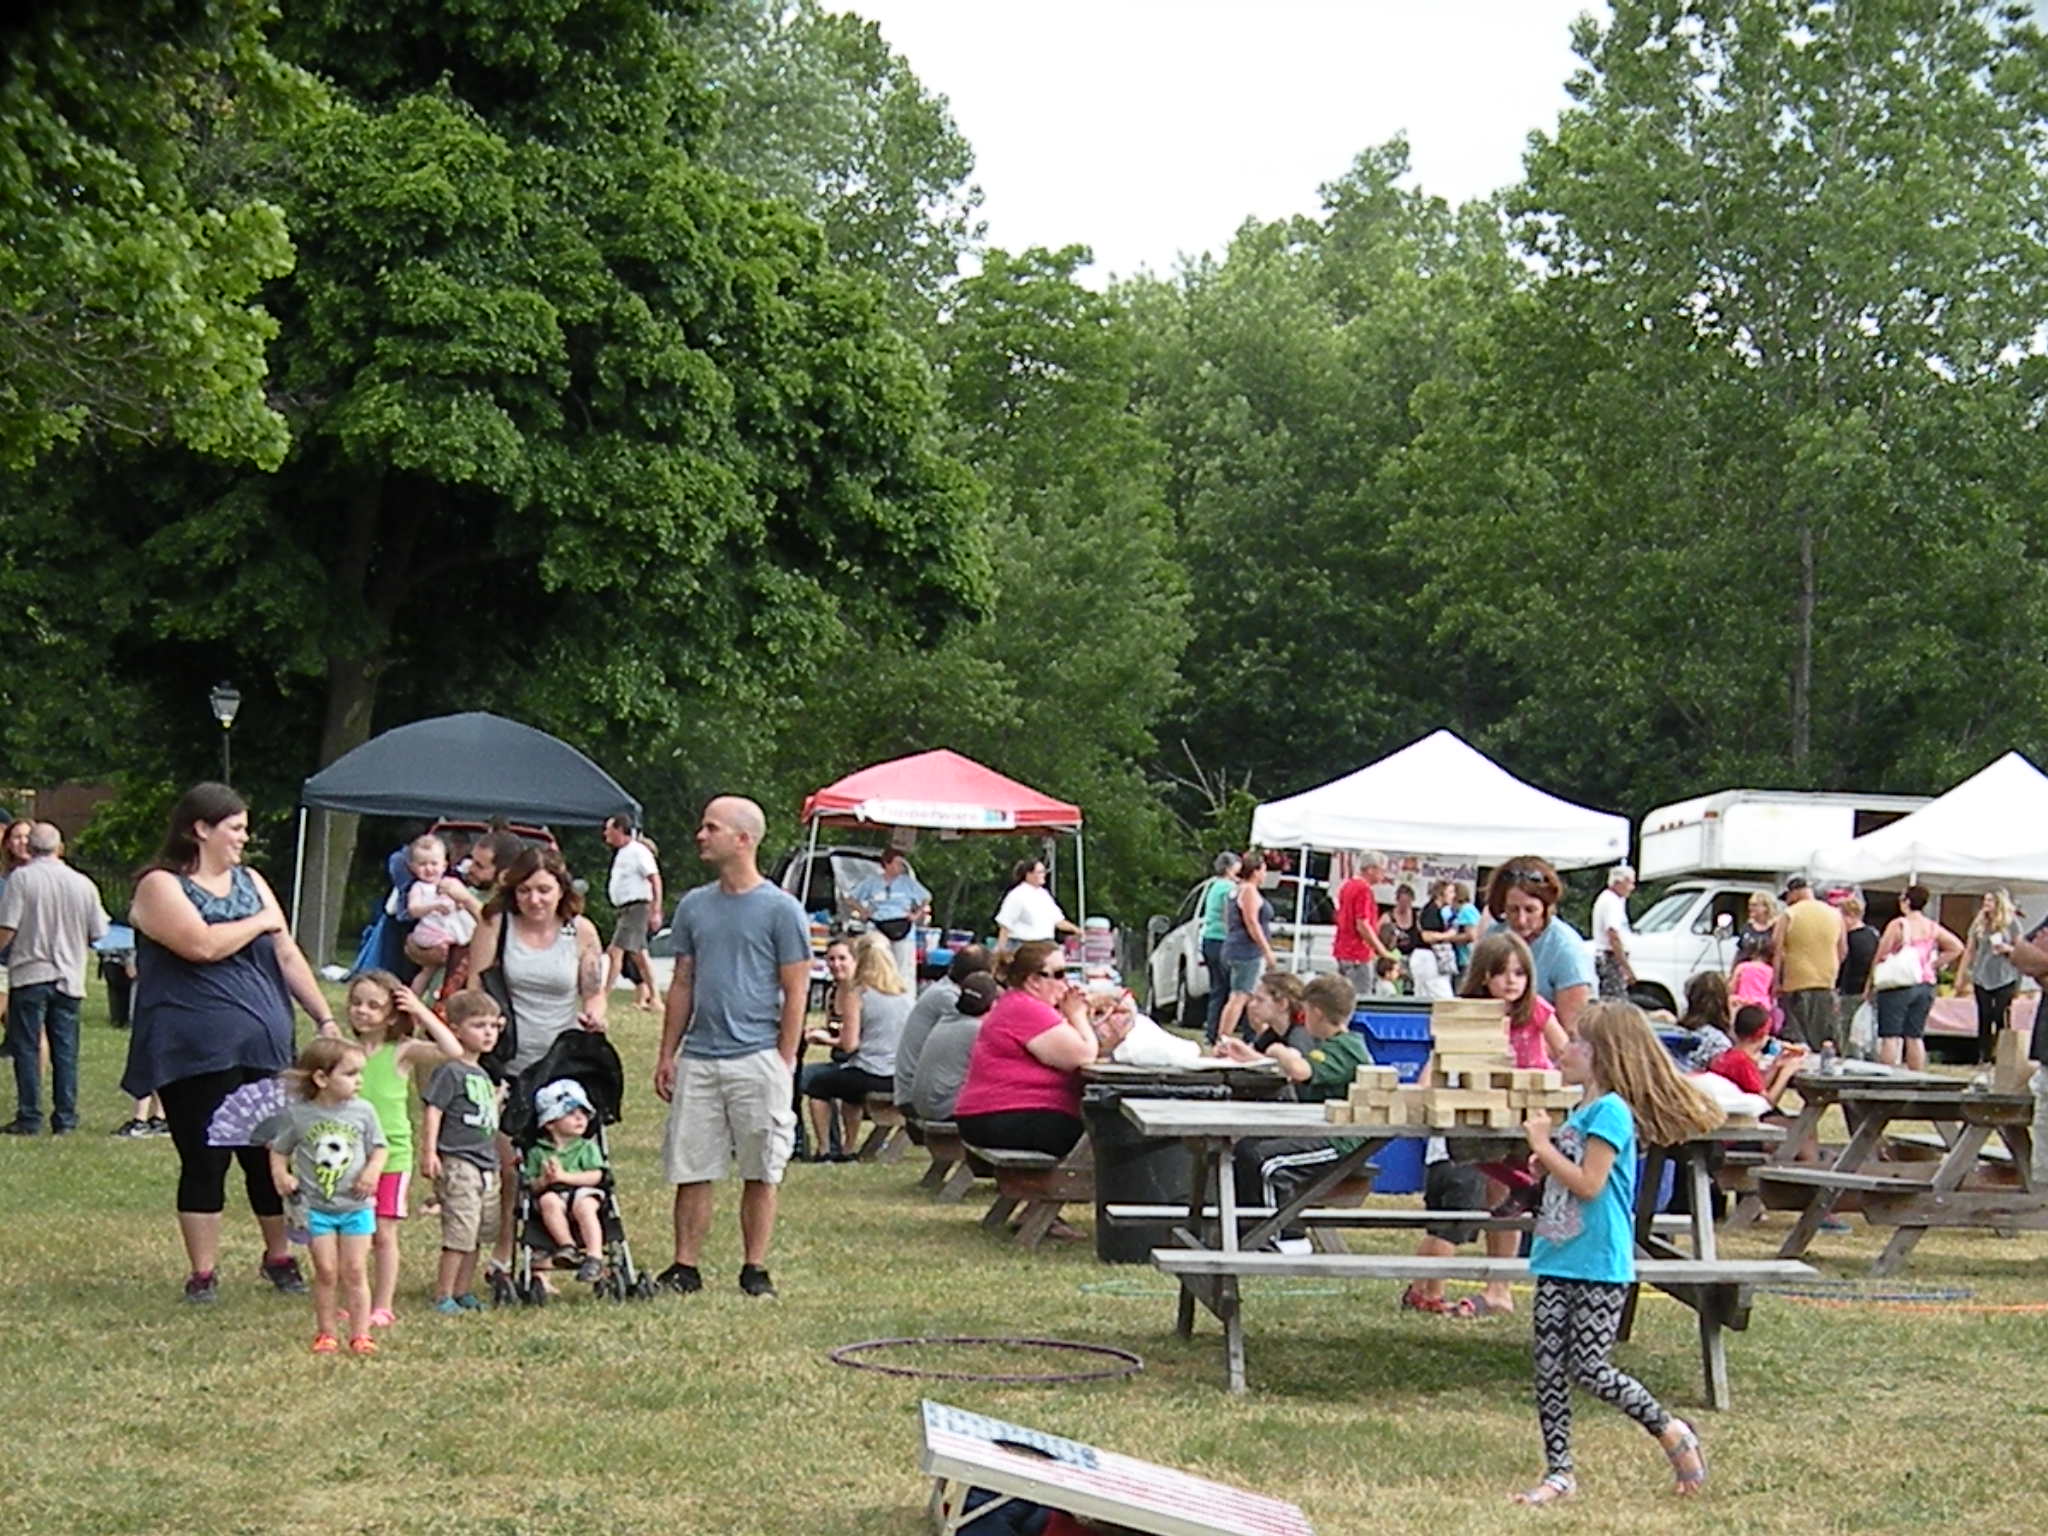 West Seneca’s outdoor farmers’ market continues on July 7